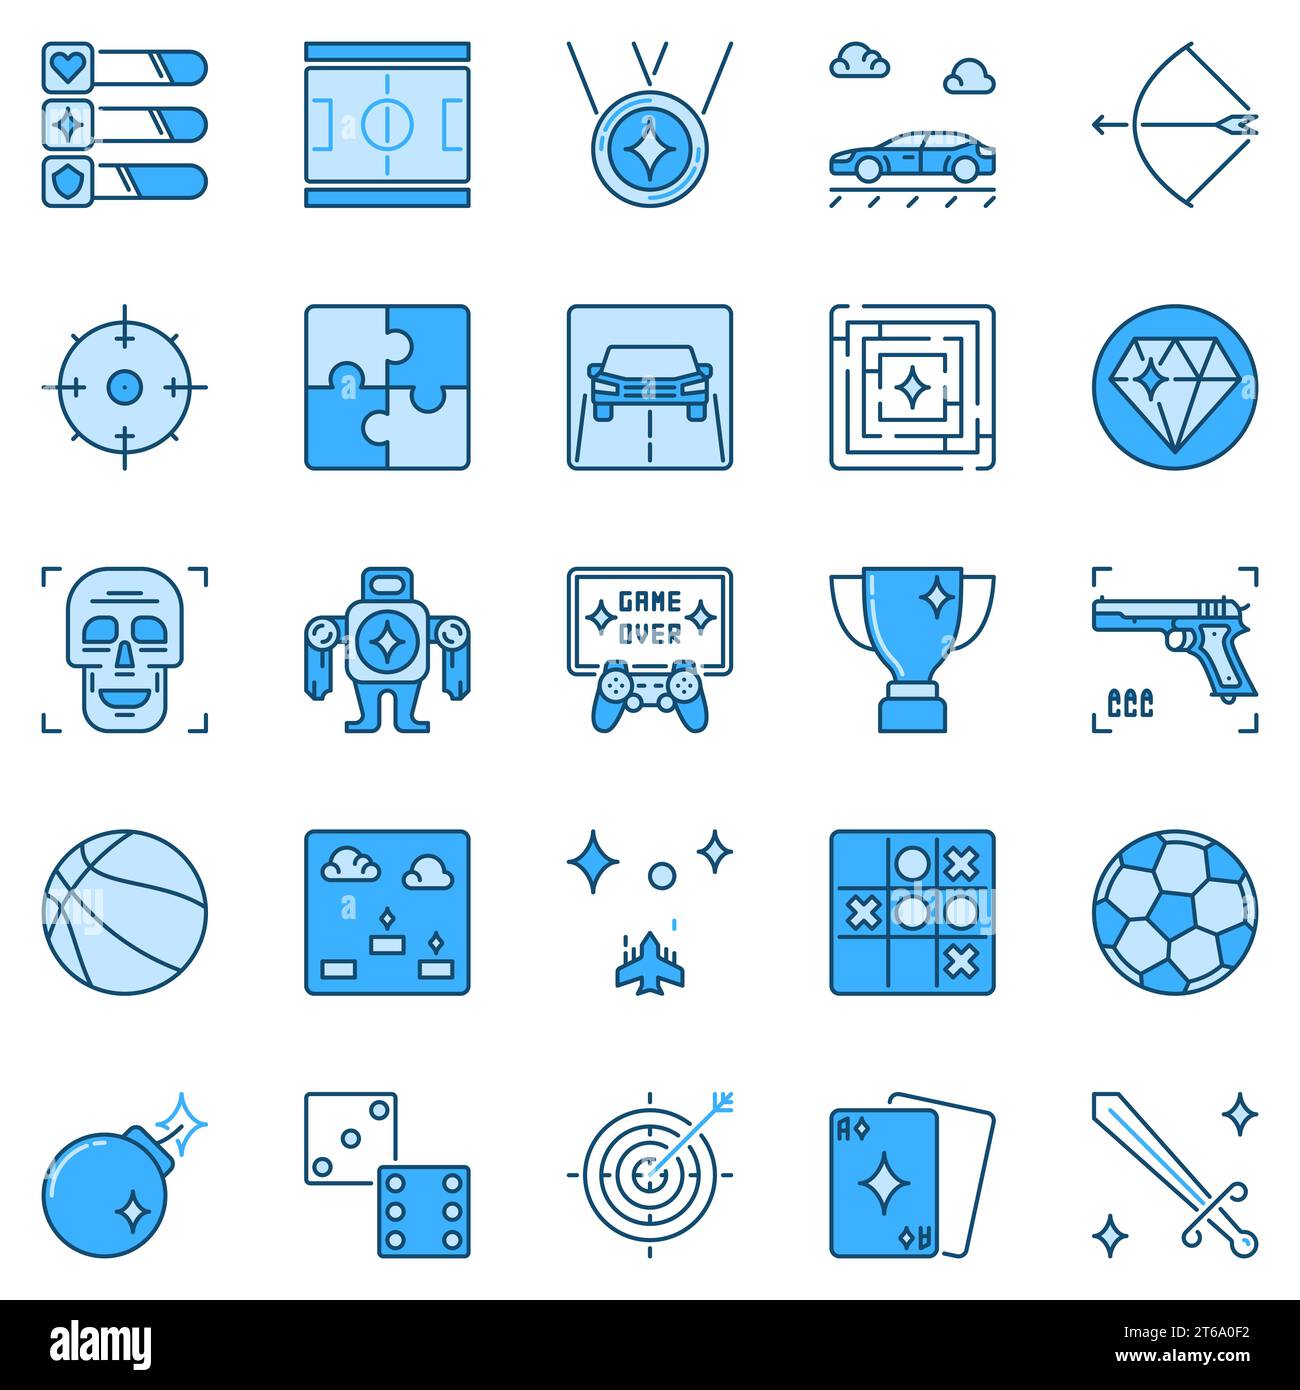 Videos Games and Gaming blue concept icons. Game creative symbols on white background Stock Vector